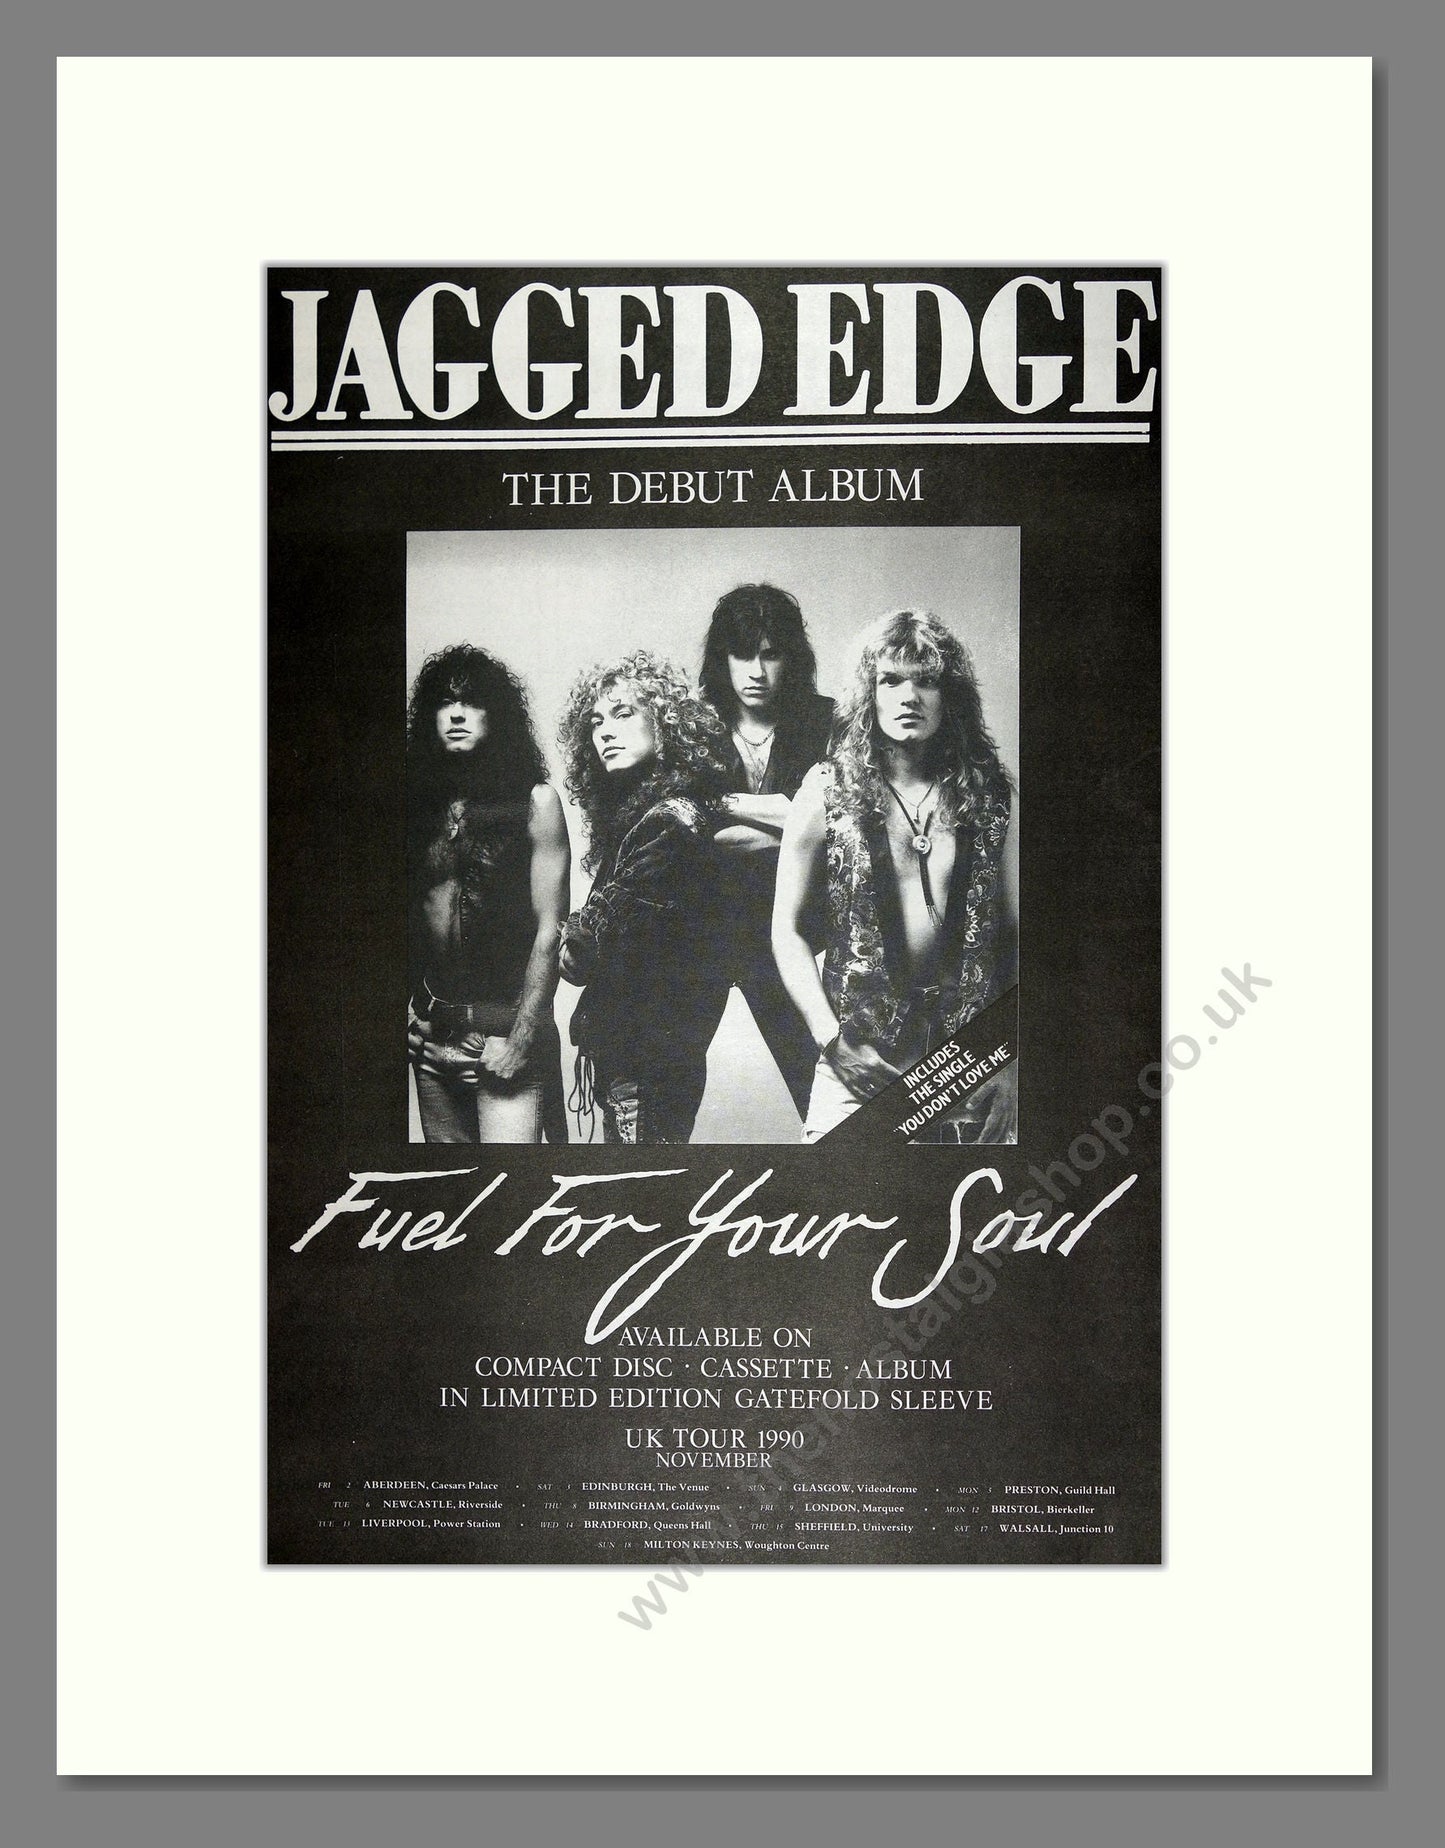 Jagged Edge - Fuel for your Soul. Vintage Advert 1990 (ref AD16470)